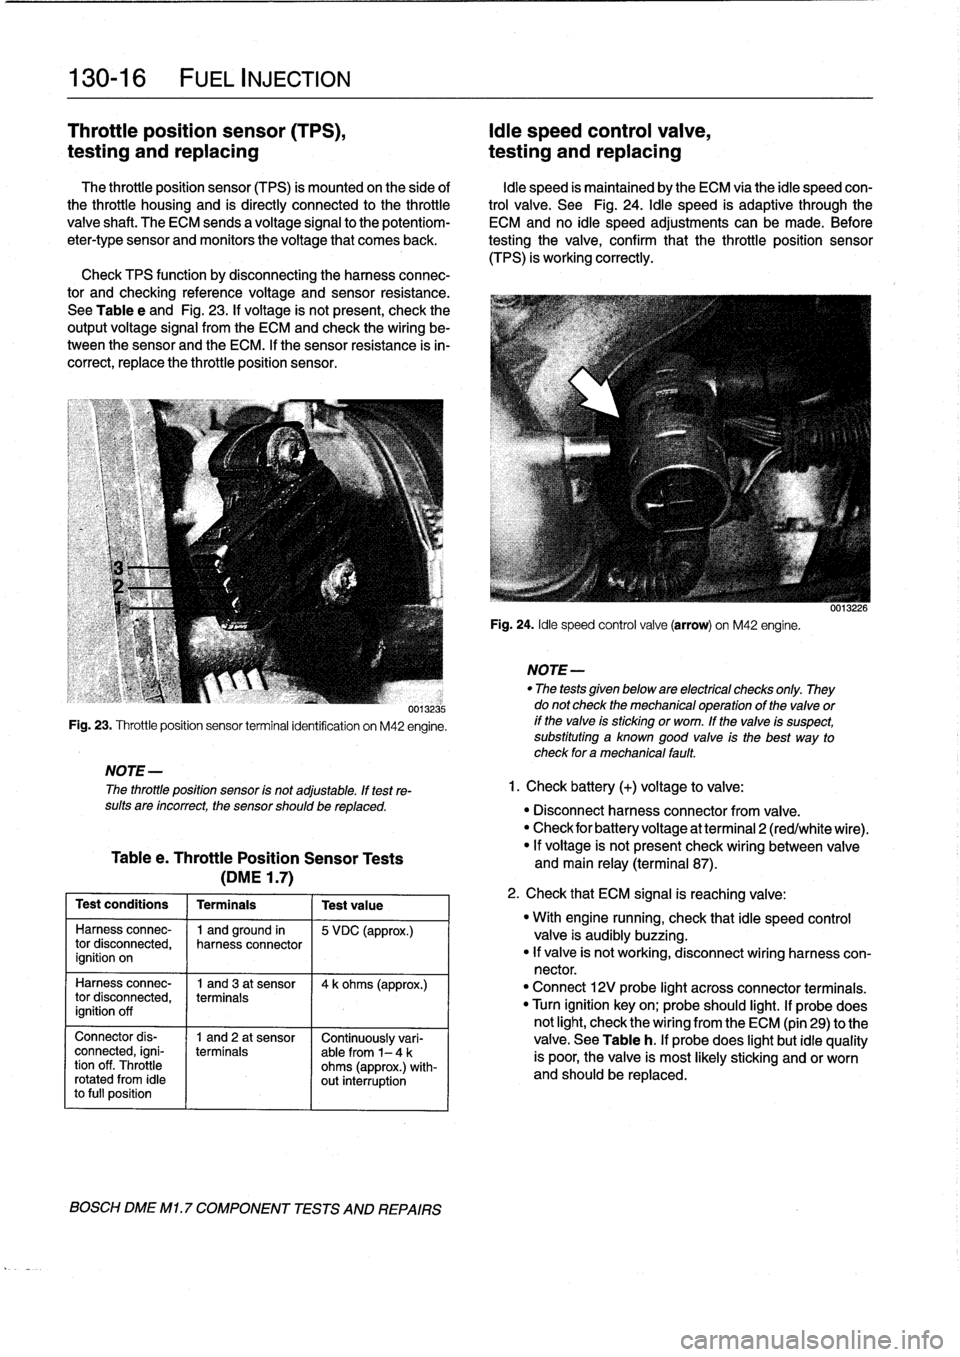 BMW 318i 1997 E36 User Guide 
130-
1
6

	

FUEL
INJECTION

Throttie
position
sensor
(TPS),

	

Idie
speed
control
valve,
testing
and
replacing

	

testing
and
replacing

The
throttie
position
sensor
(TPS)
is
mounted
on
the
side
o